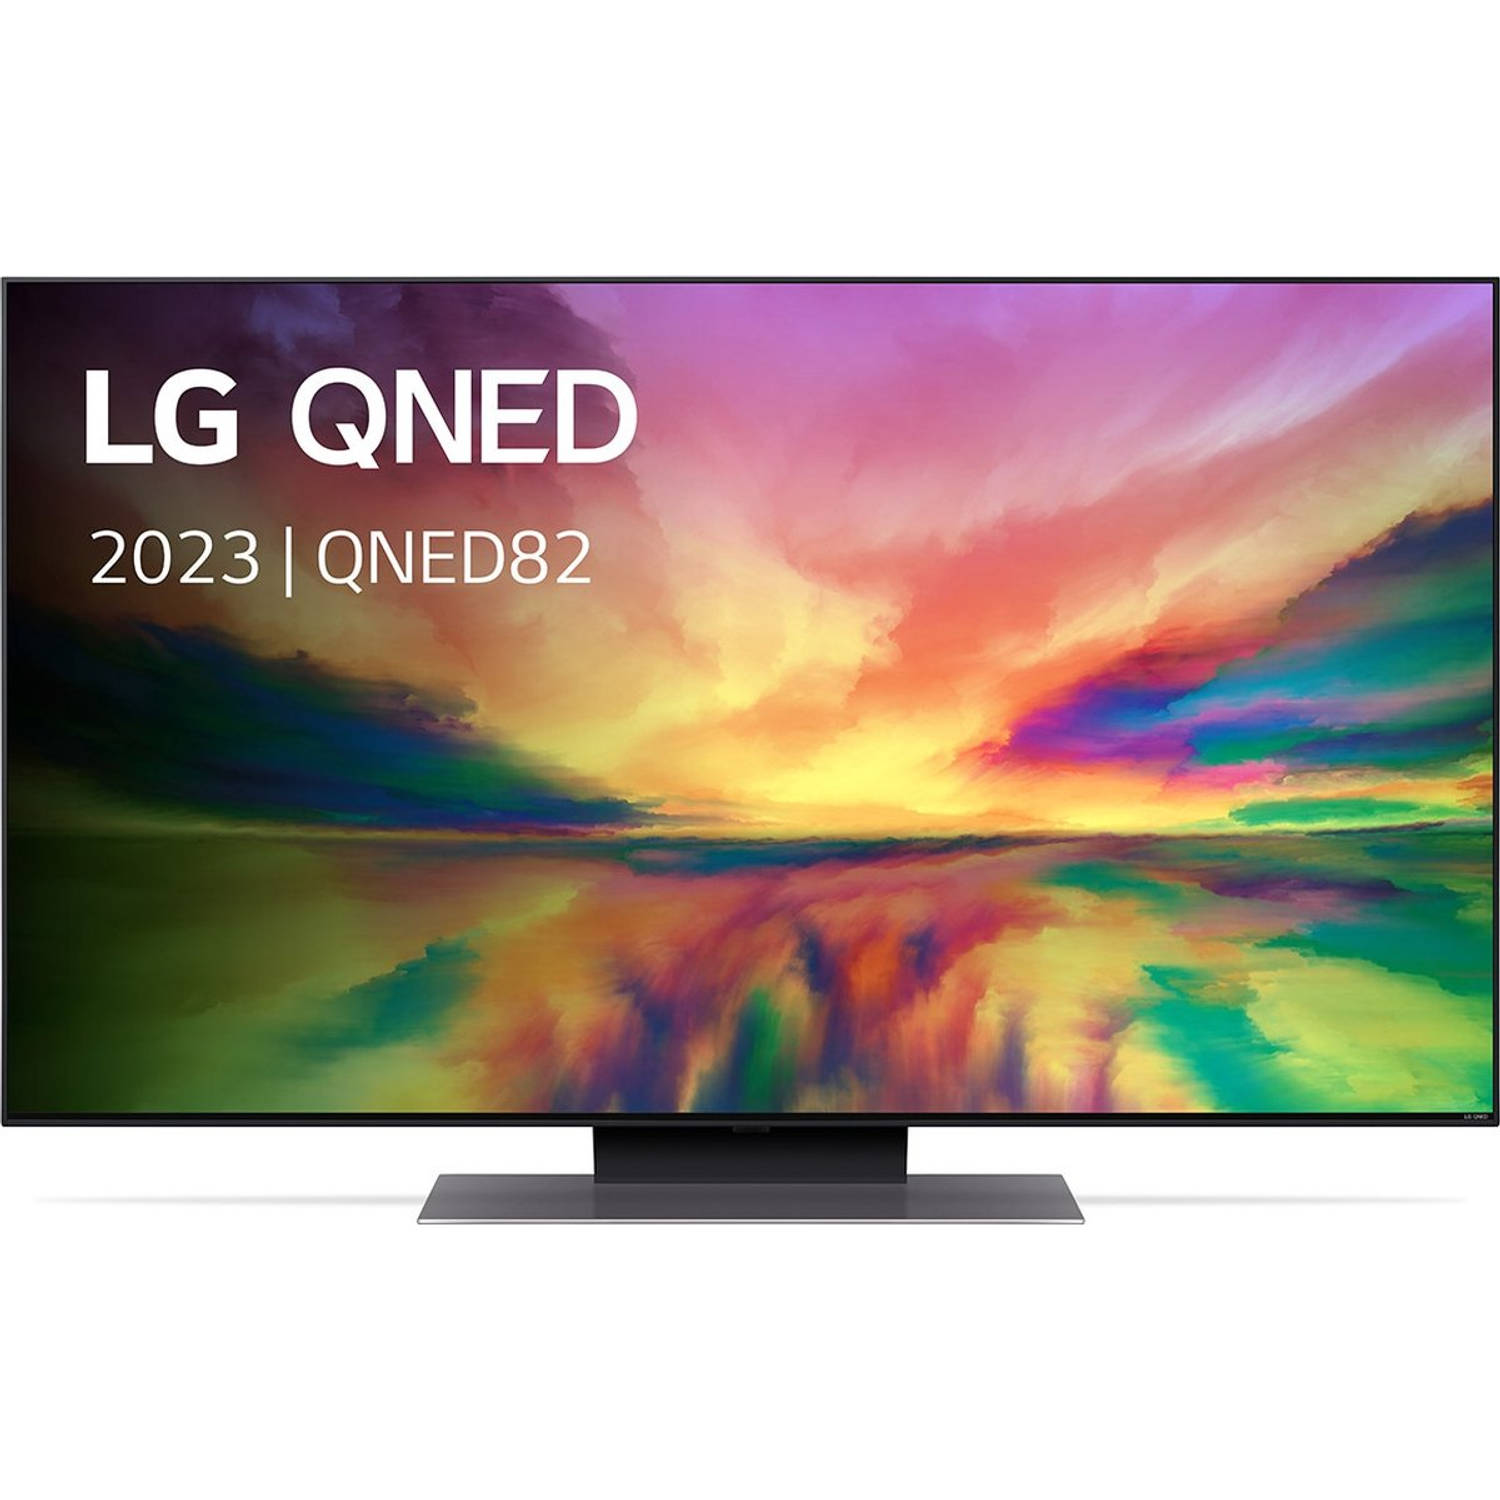 LG QNED 50QNED826RE smart tv - 50 inch - 100 Hz